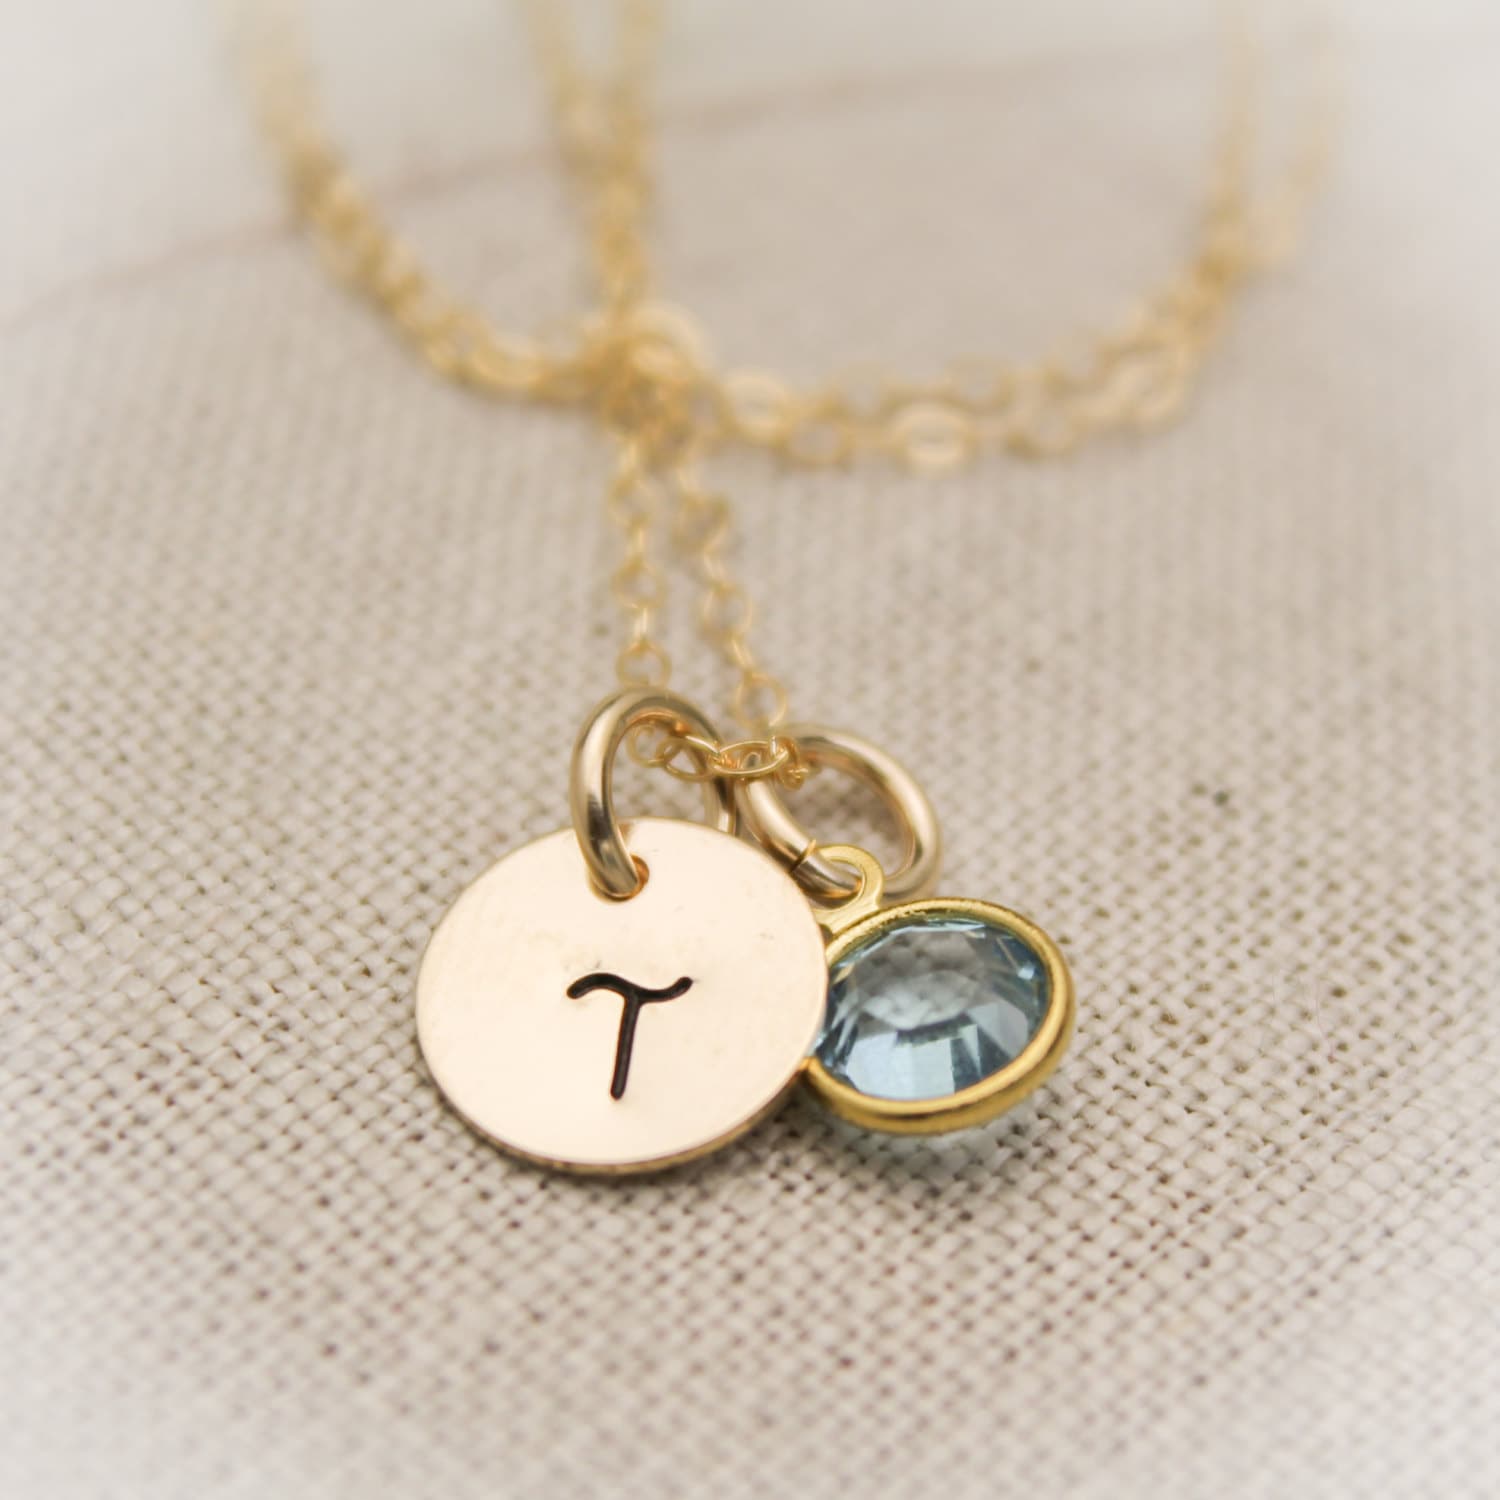 14K Gold Filled Initial Monogram Necklace with Birthstone Charm  Personalized Hand Stamped Jewelry